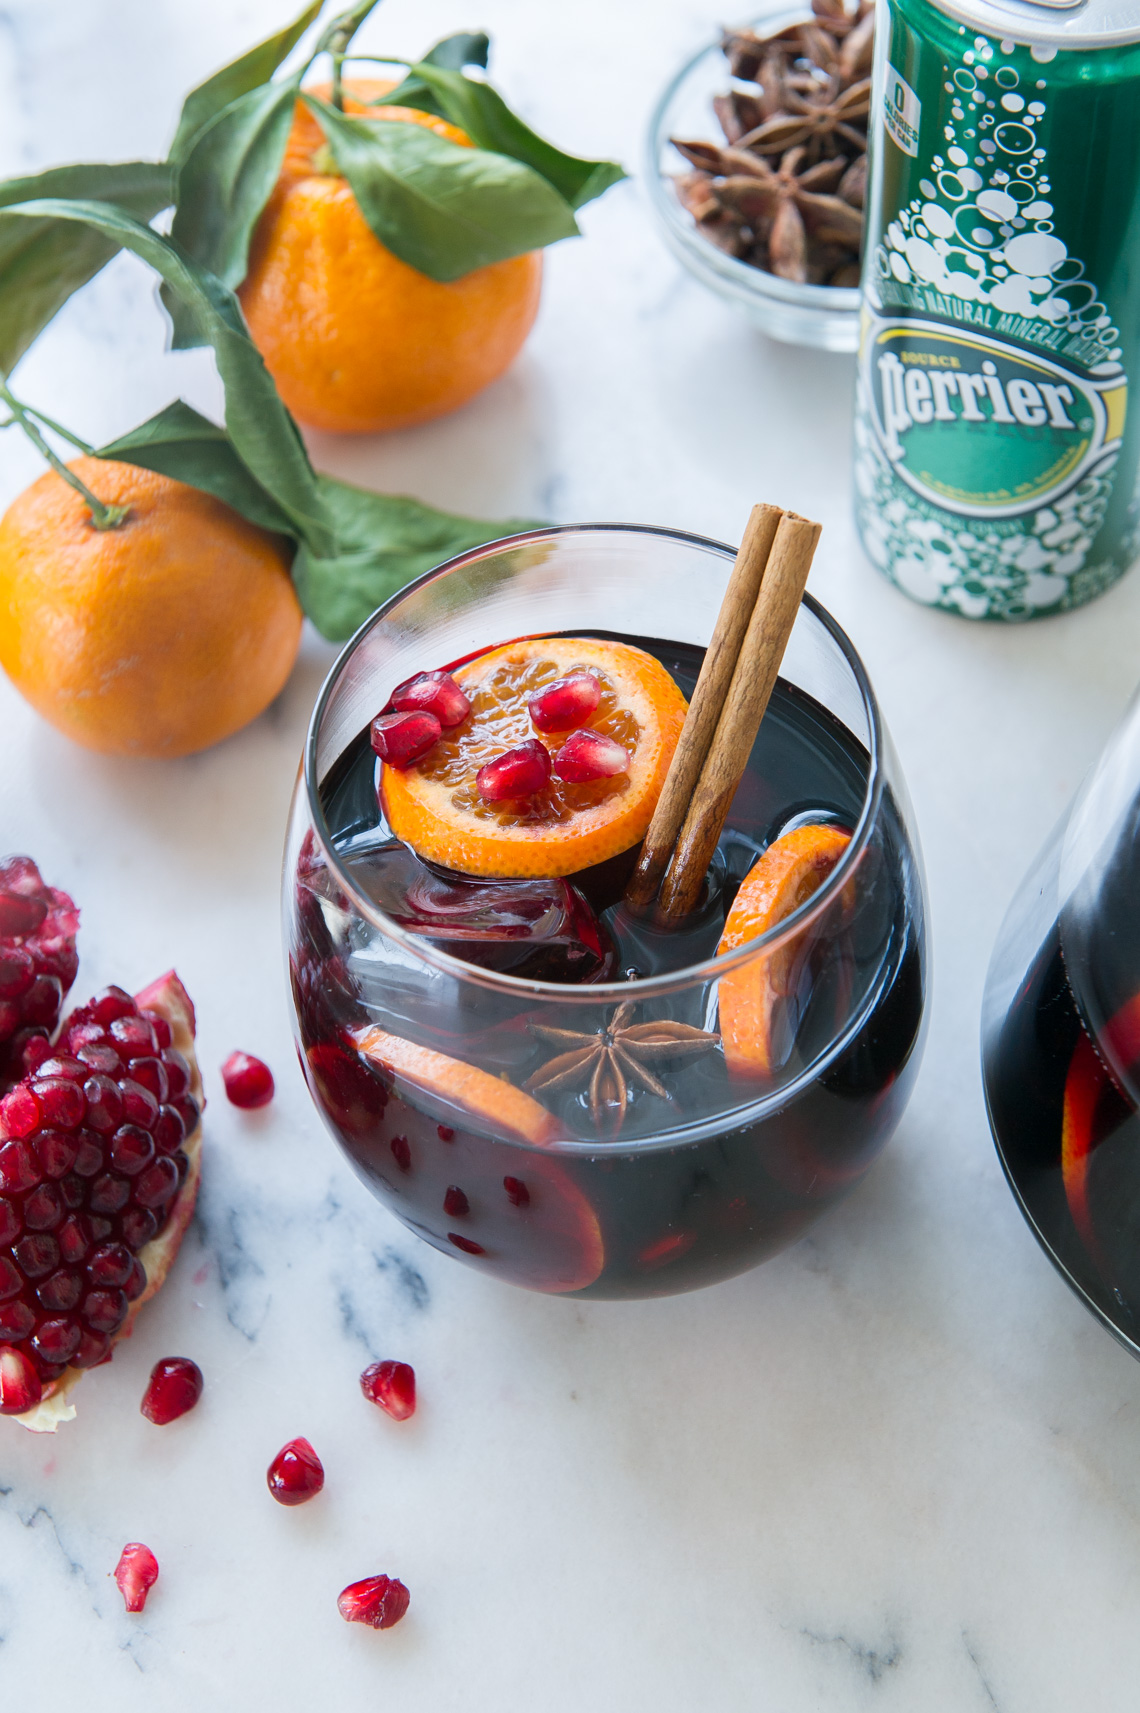 NYC Commercial Beverage Photographer - Perrier Cocktails